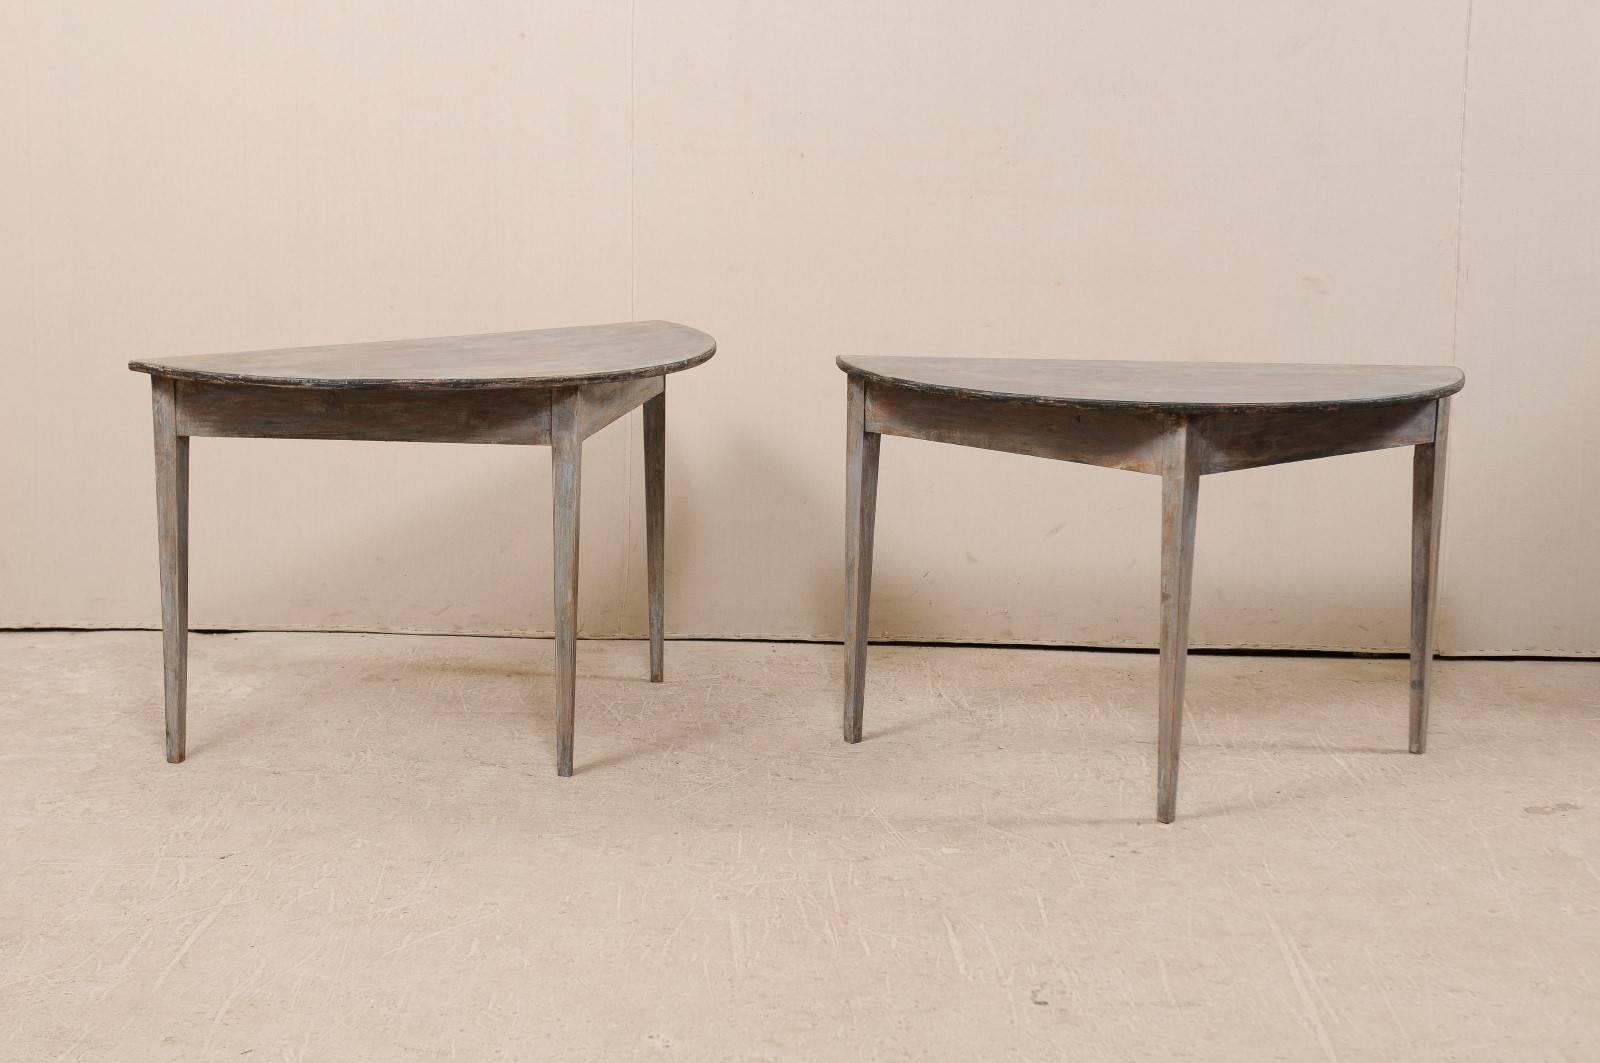 A pair of 19th century Swedish painted wood demilune tables. This pair of Swedish demilune table features a semi-circular top over a triangular shaped apron. These demilune tables are each raised upon three squared and gently tapered legs. The